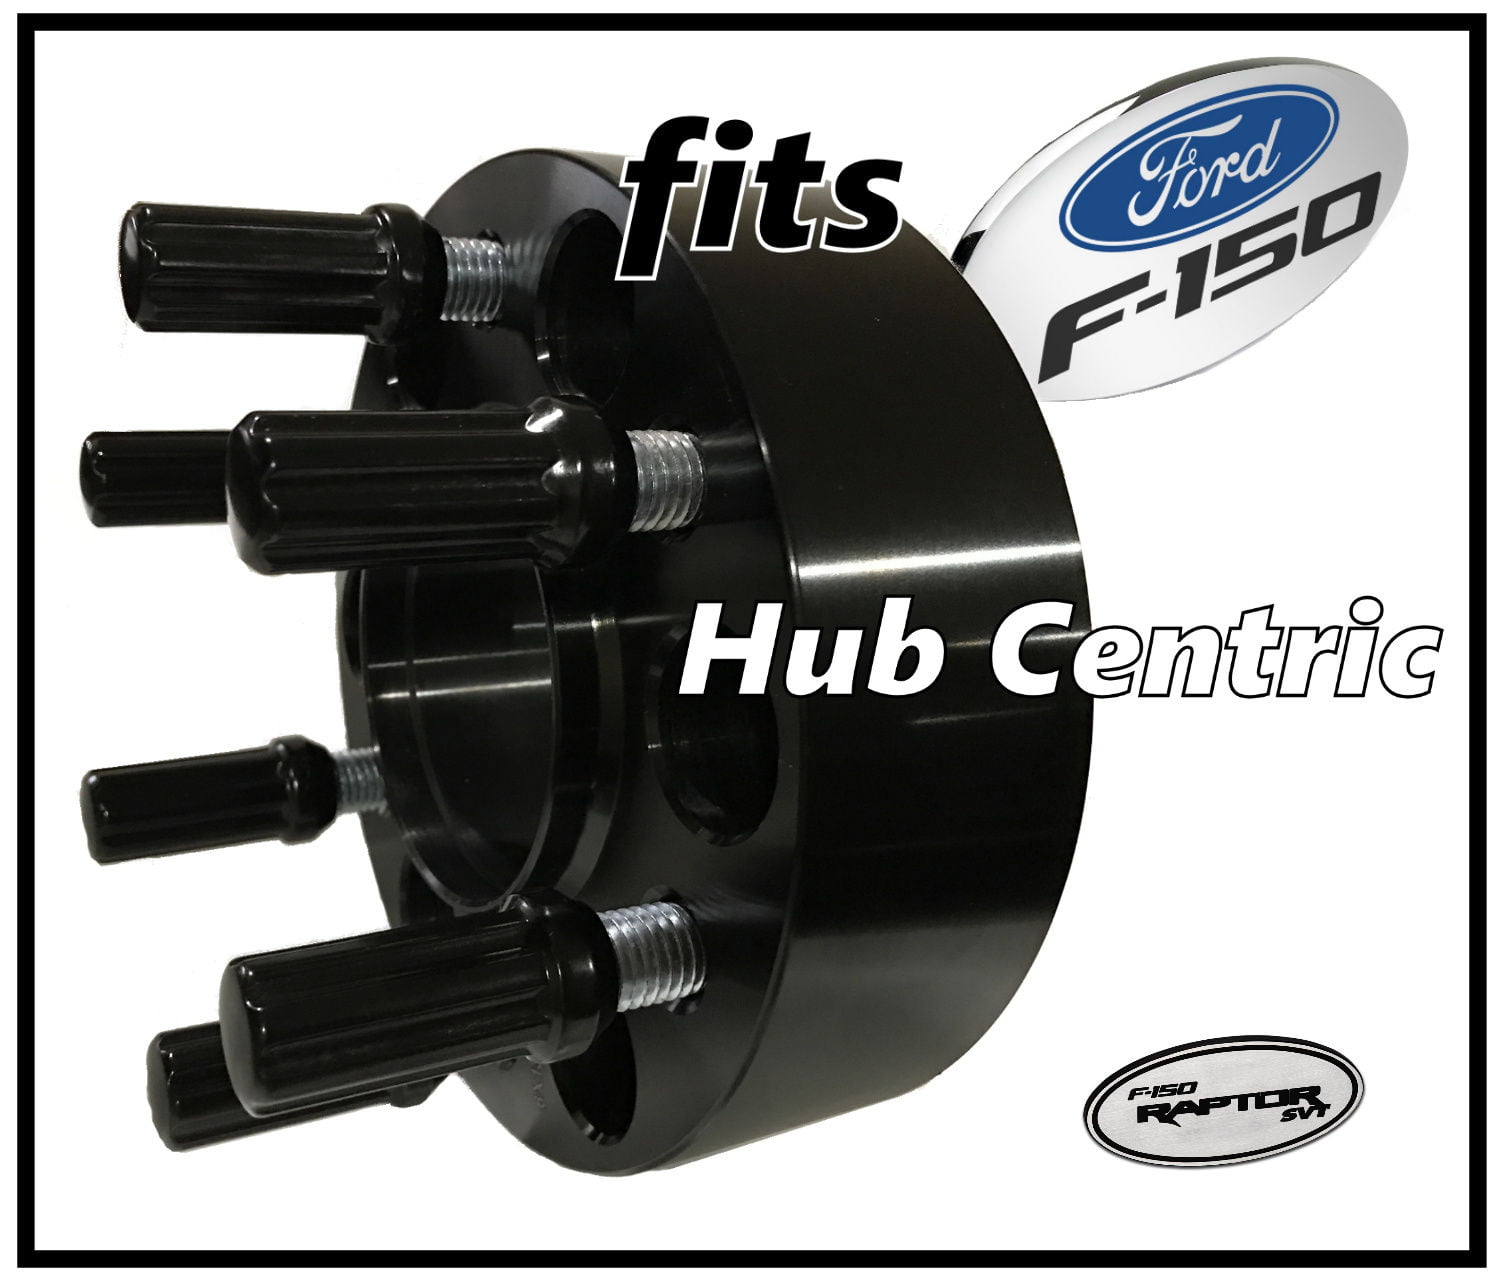 2 Hub centric Black Ford Wheel Spacers Adapters fits 5 lug F150 Expedition 5x135 